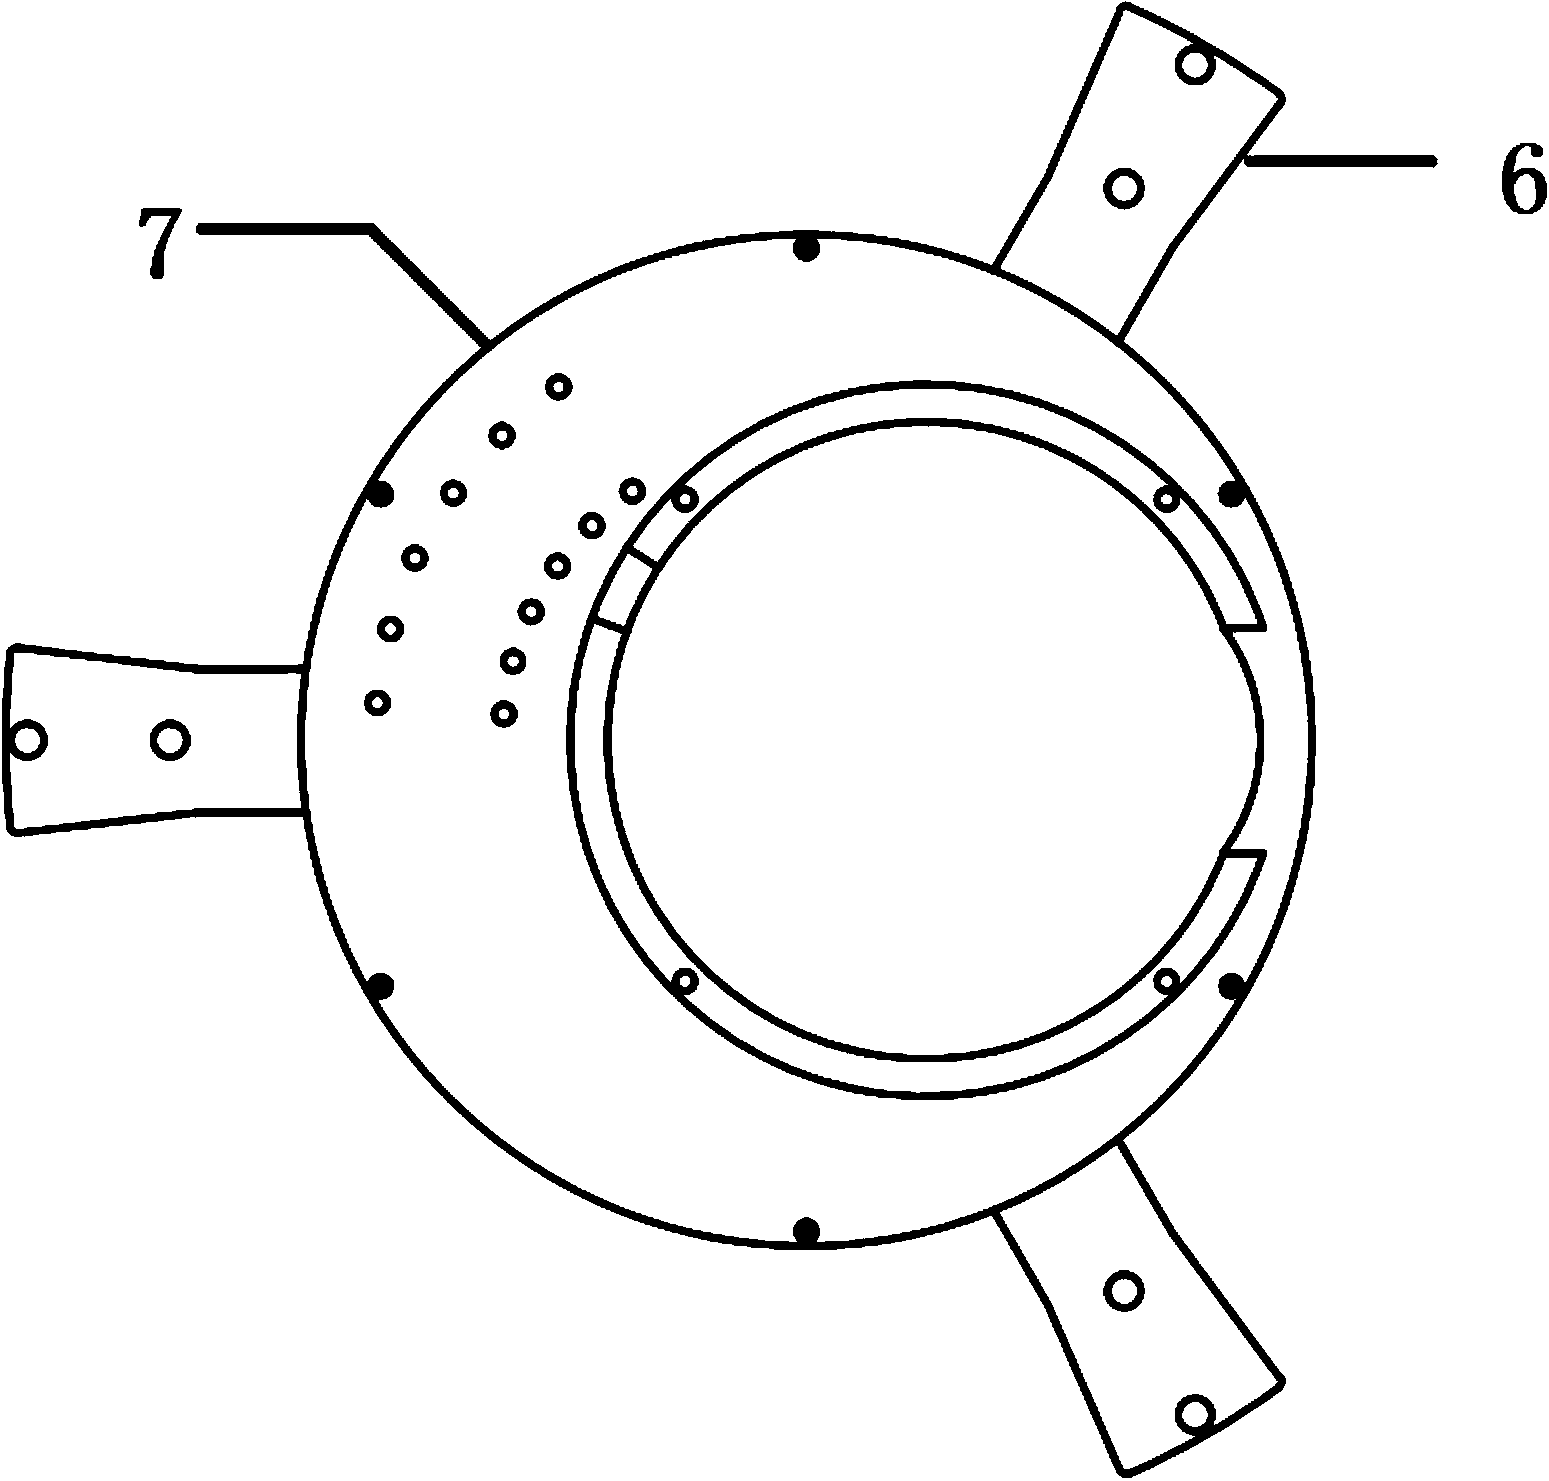 Control device for steering wheel of unmanned vehicle